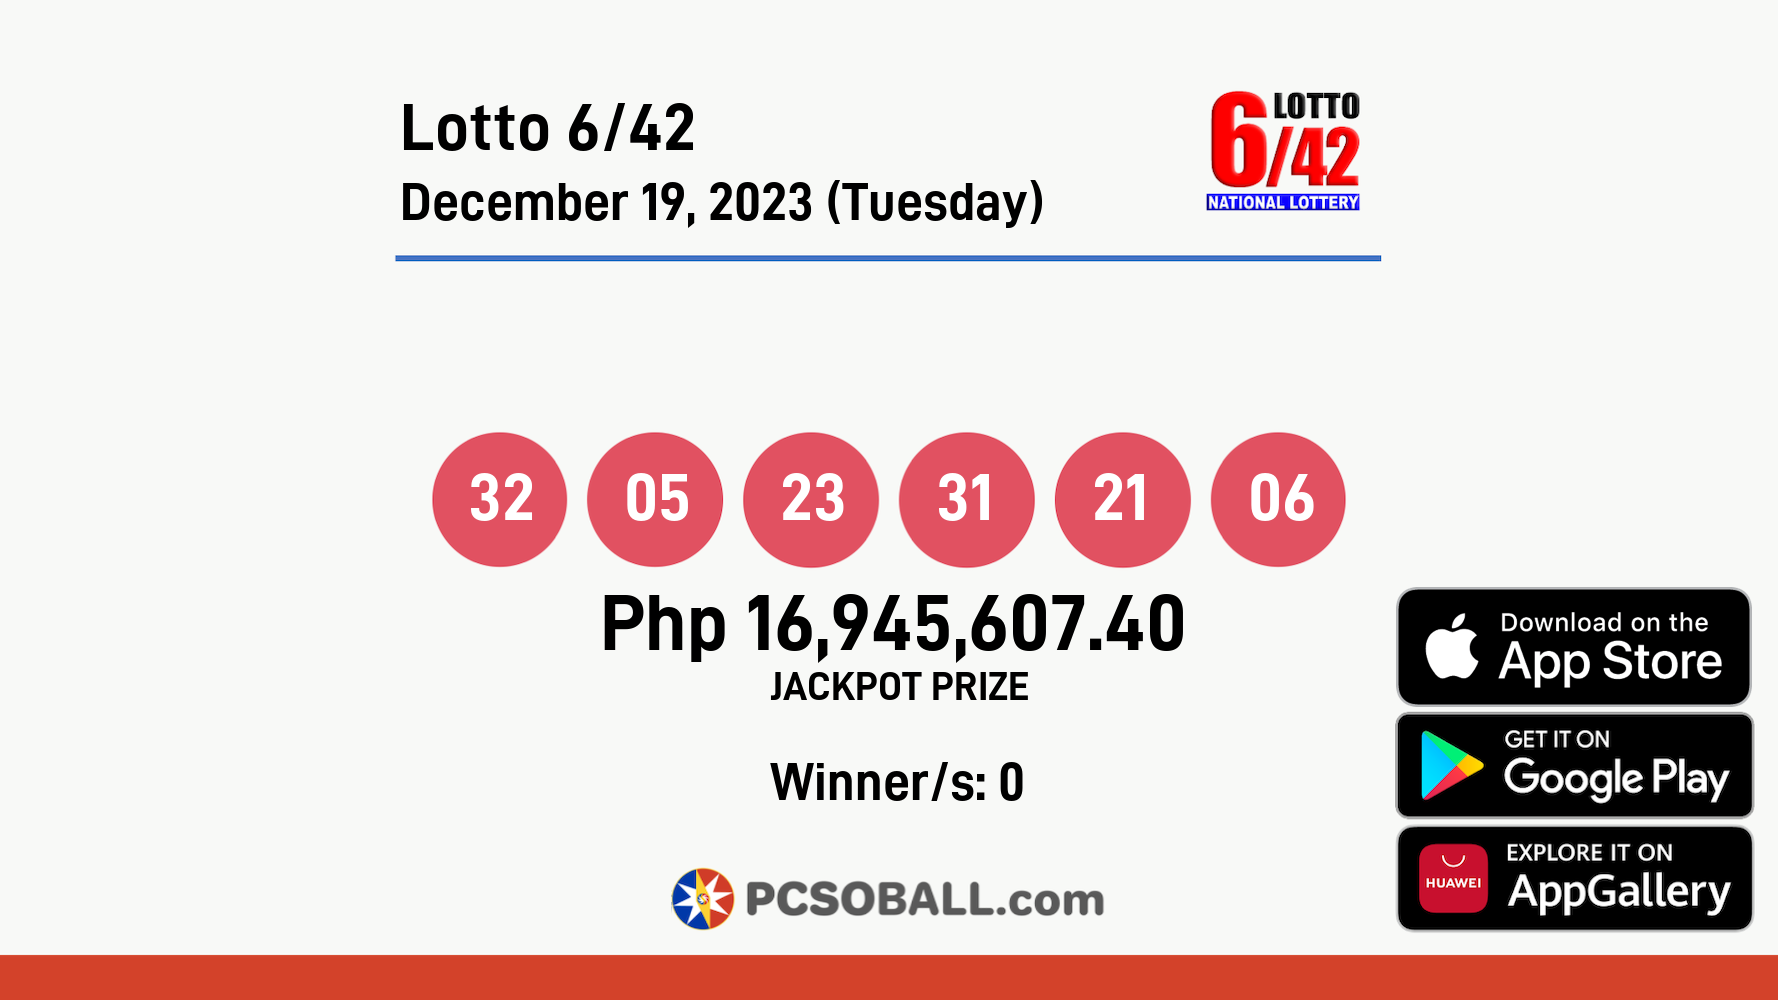 Lotto 6/42 December 19, 2023 (Tuesday) Result